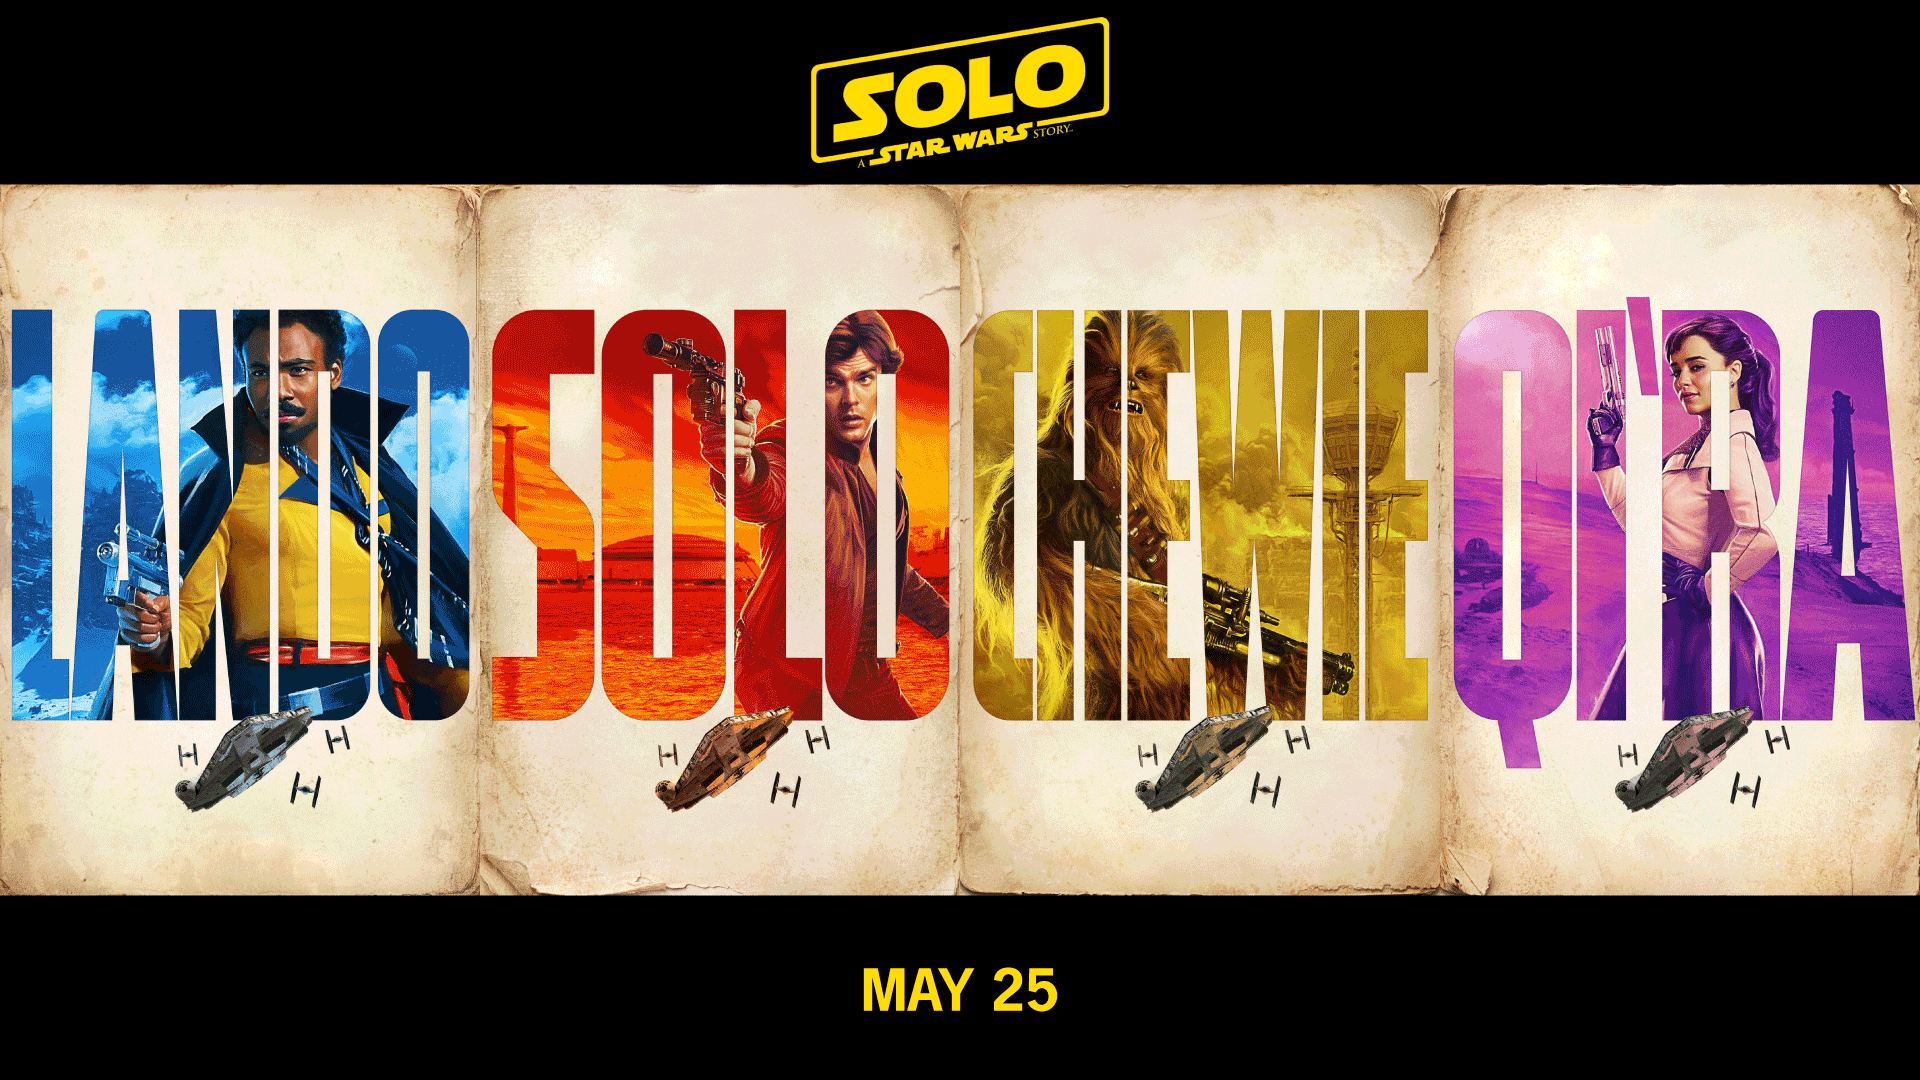 New character poster for Solo: A Star Wars Story!